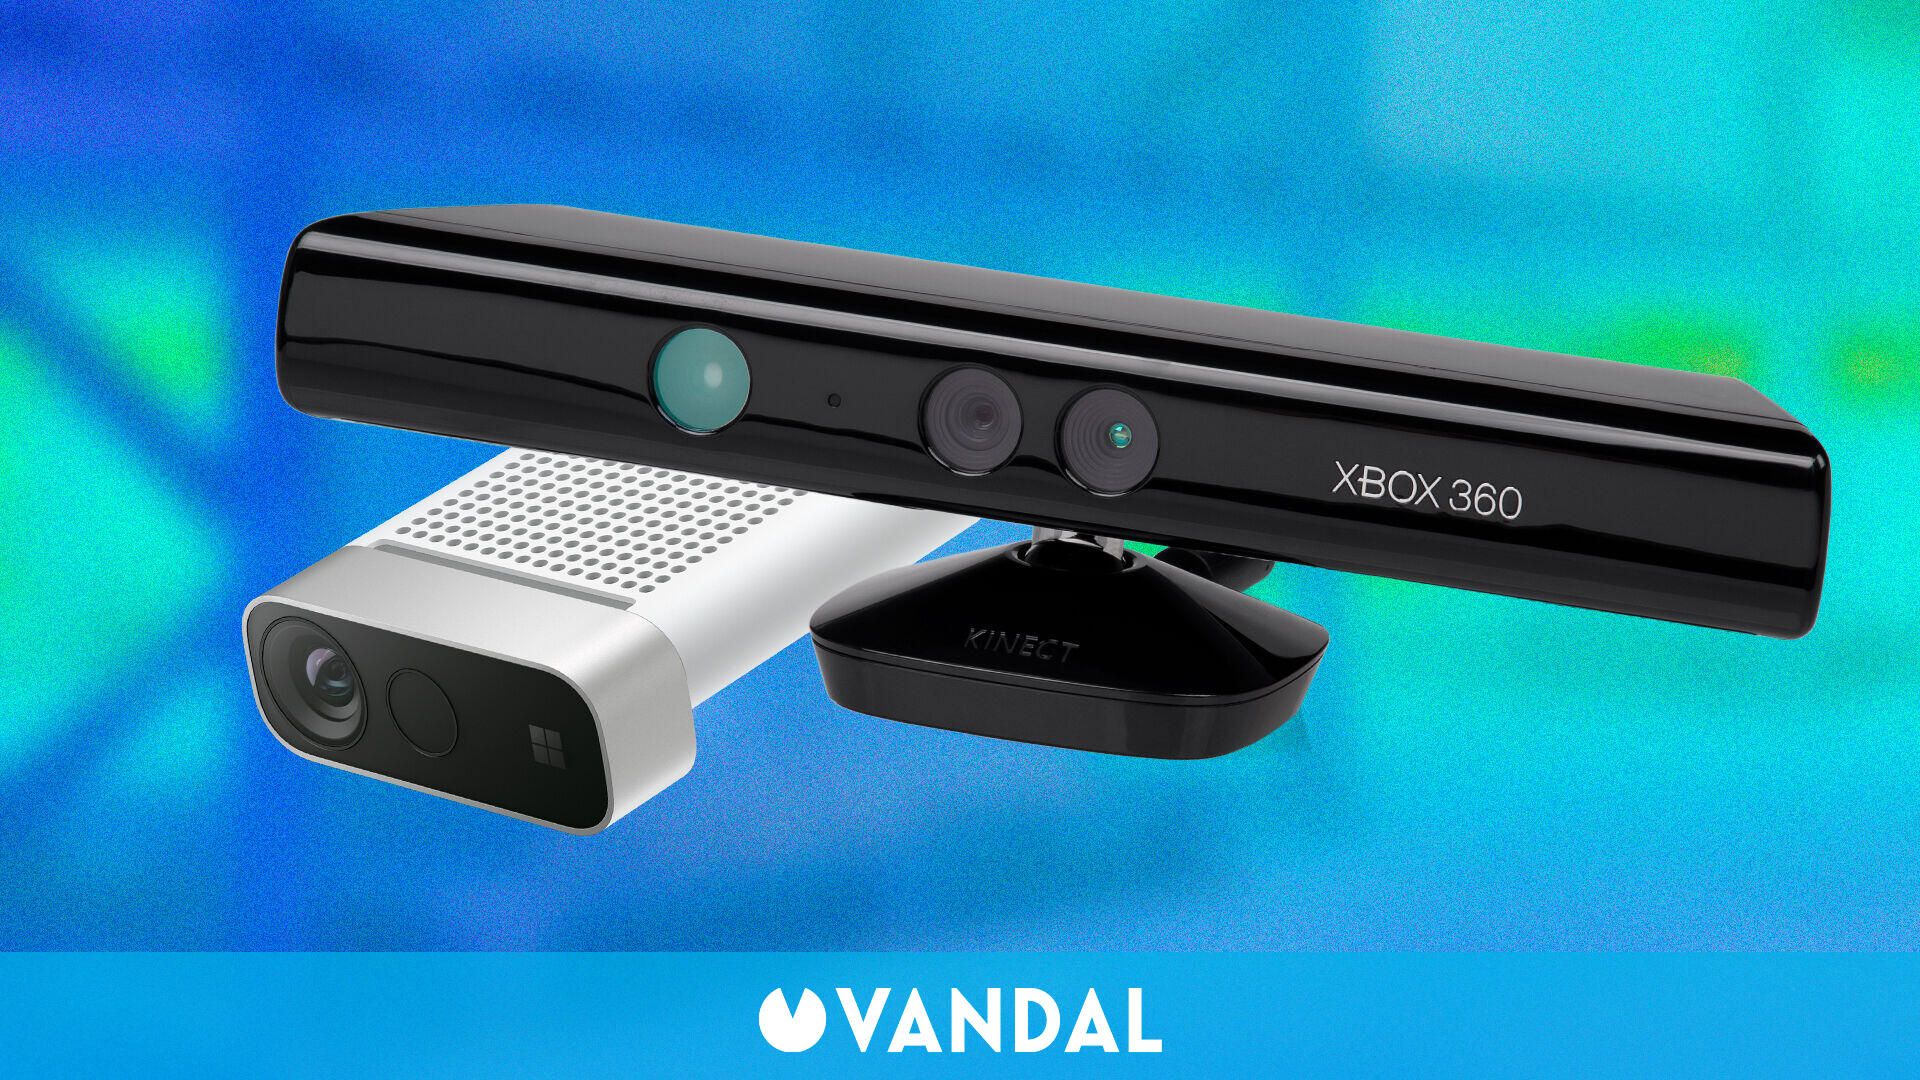 Microsoft announces the end of production of its latest Kinect technology